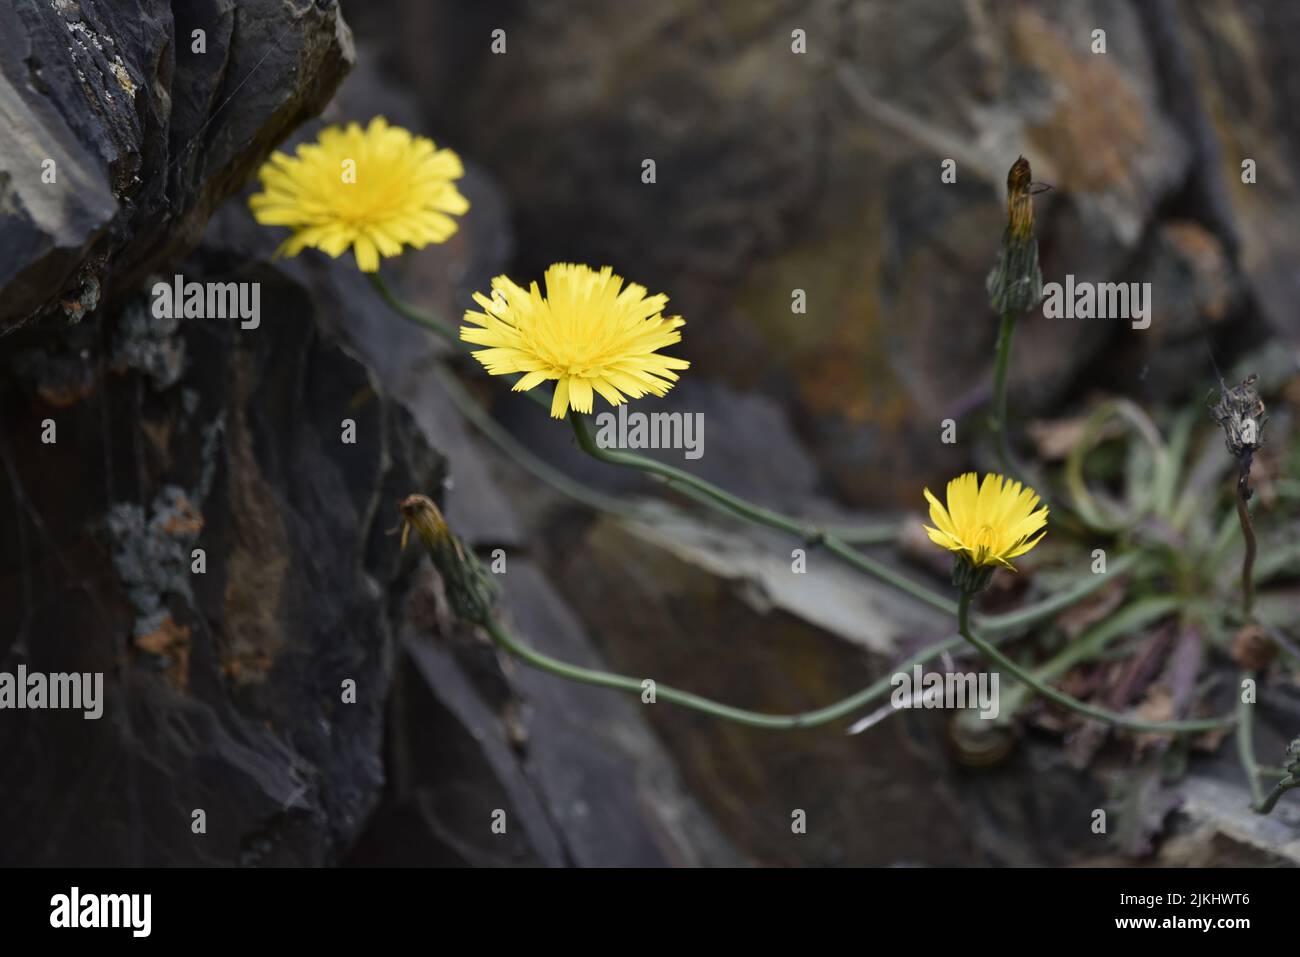 Three Yellow Daisies on Long Horizontal Stems, Growing Out of a Coastal Rock Crevice, Against a Rock Background, on the Isle of Man, UK in June Stock Photo